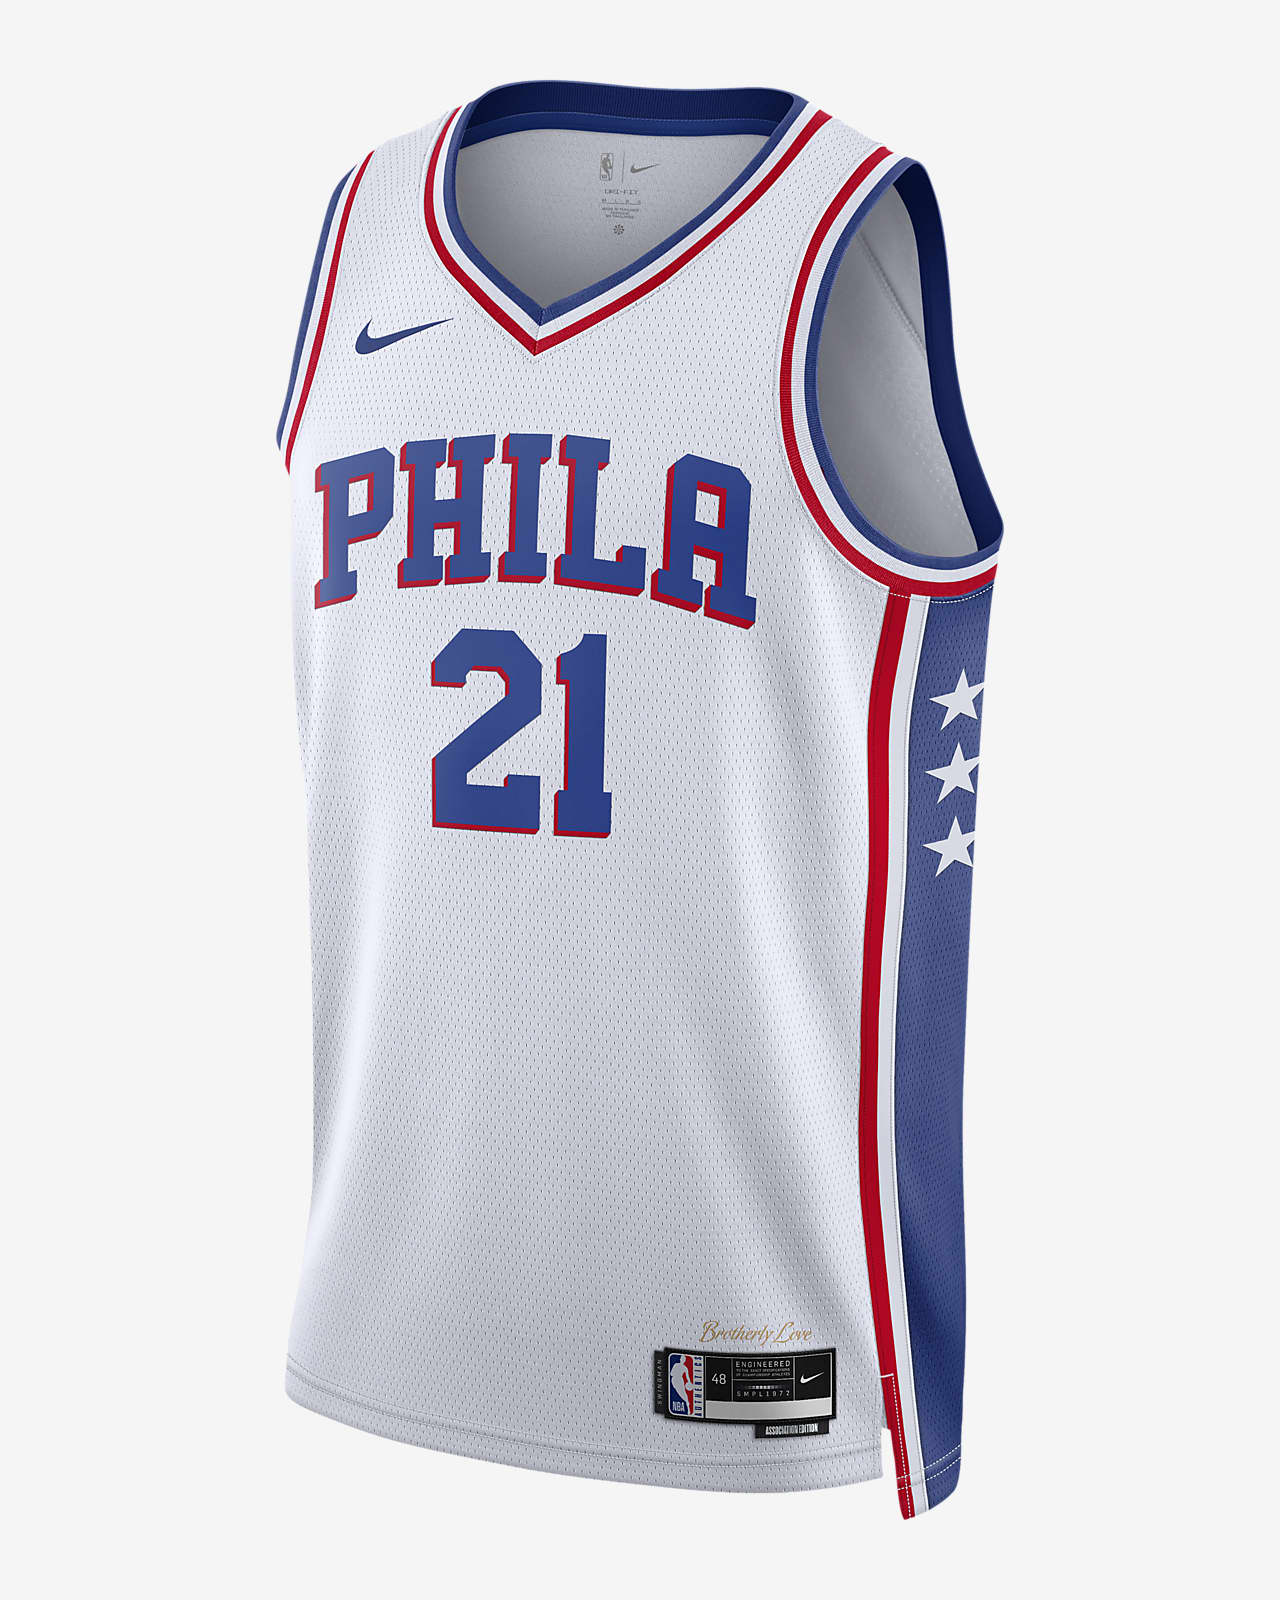 6ers jersey